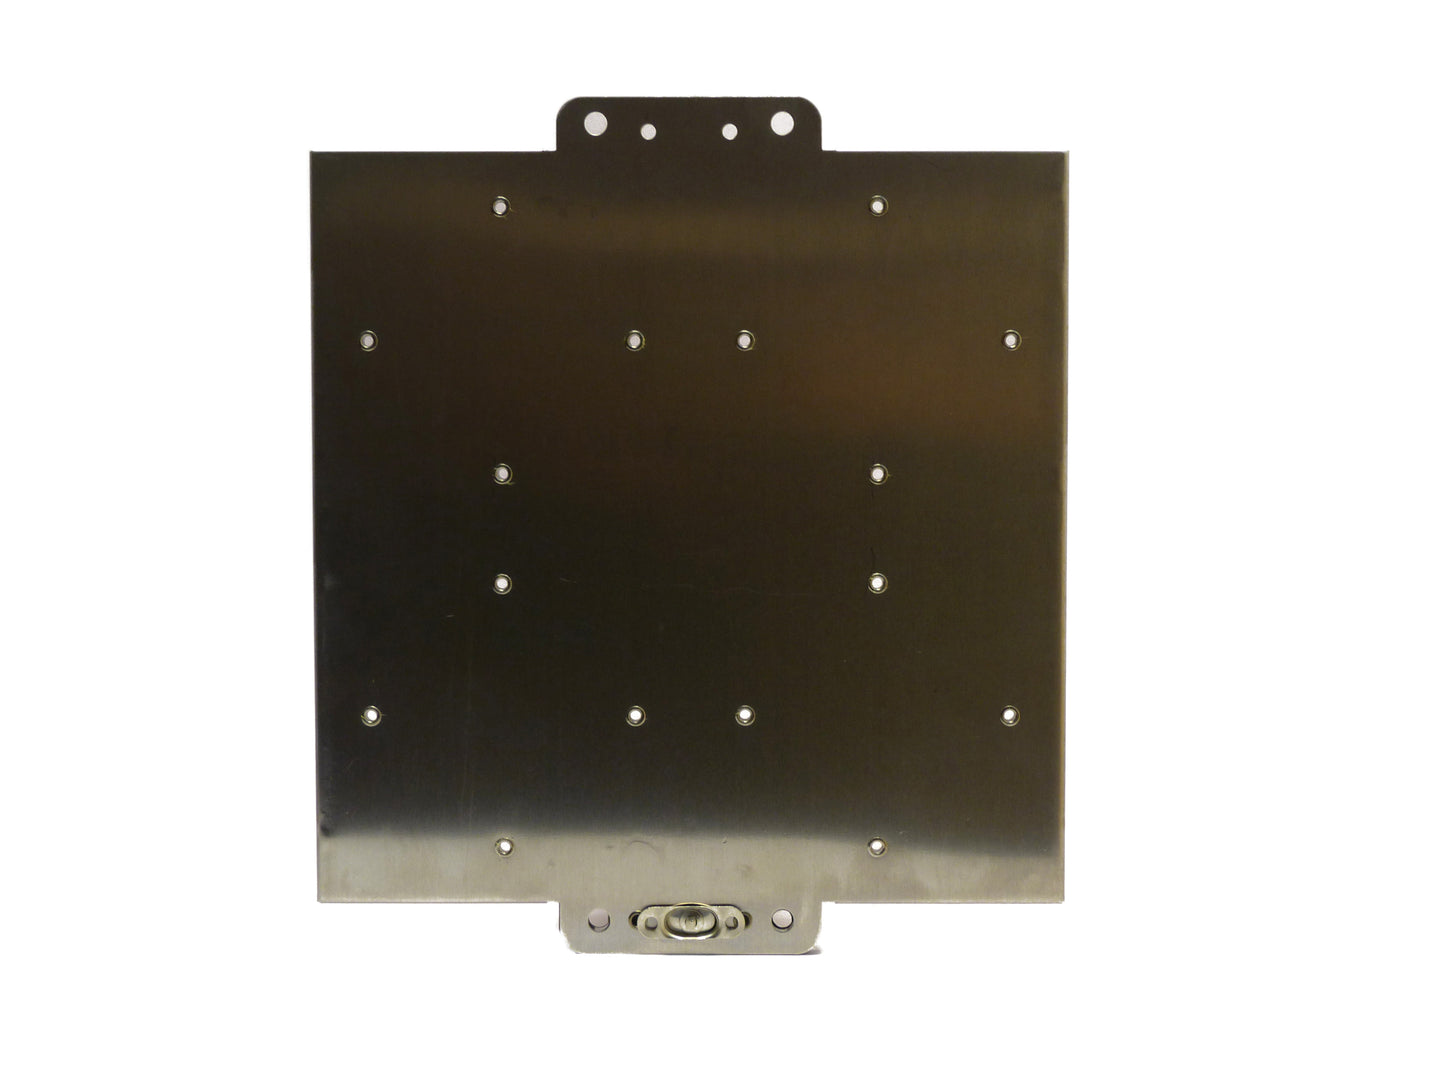 Parking reflective panel 285mm rigid pointing left